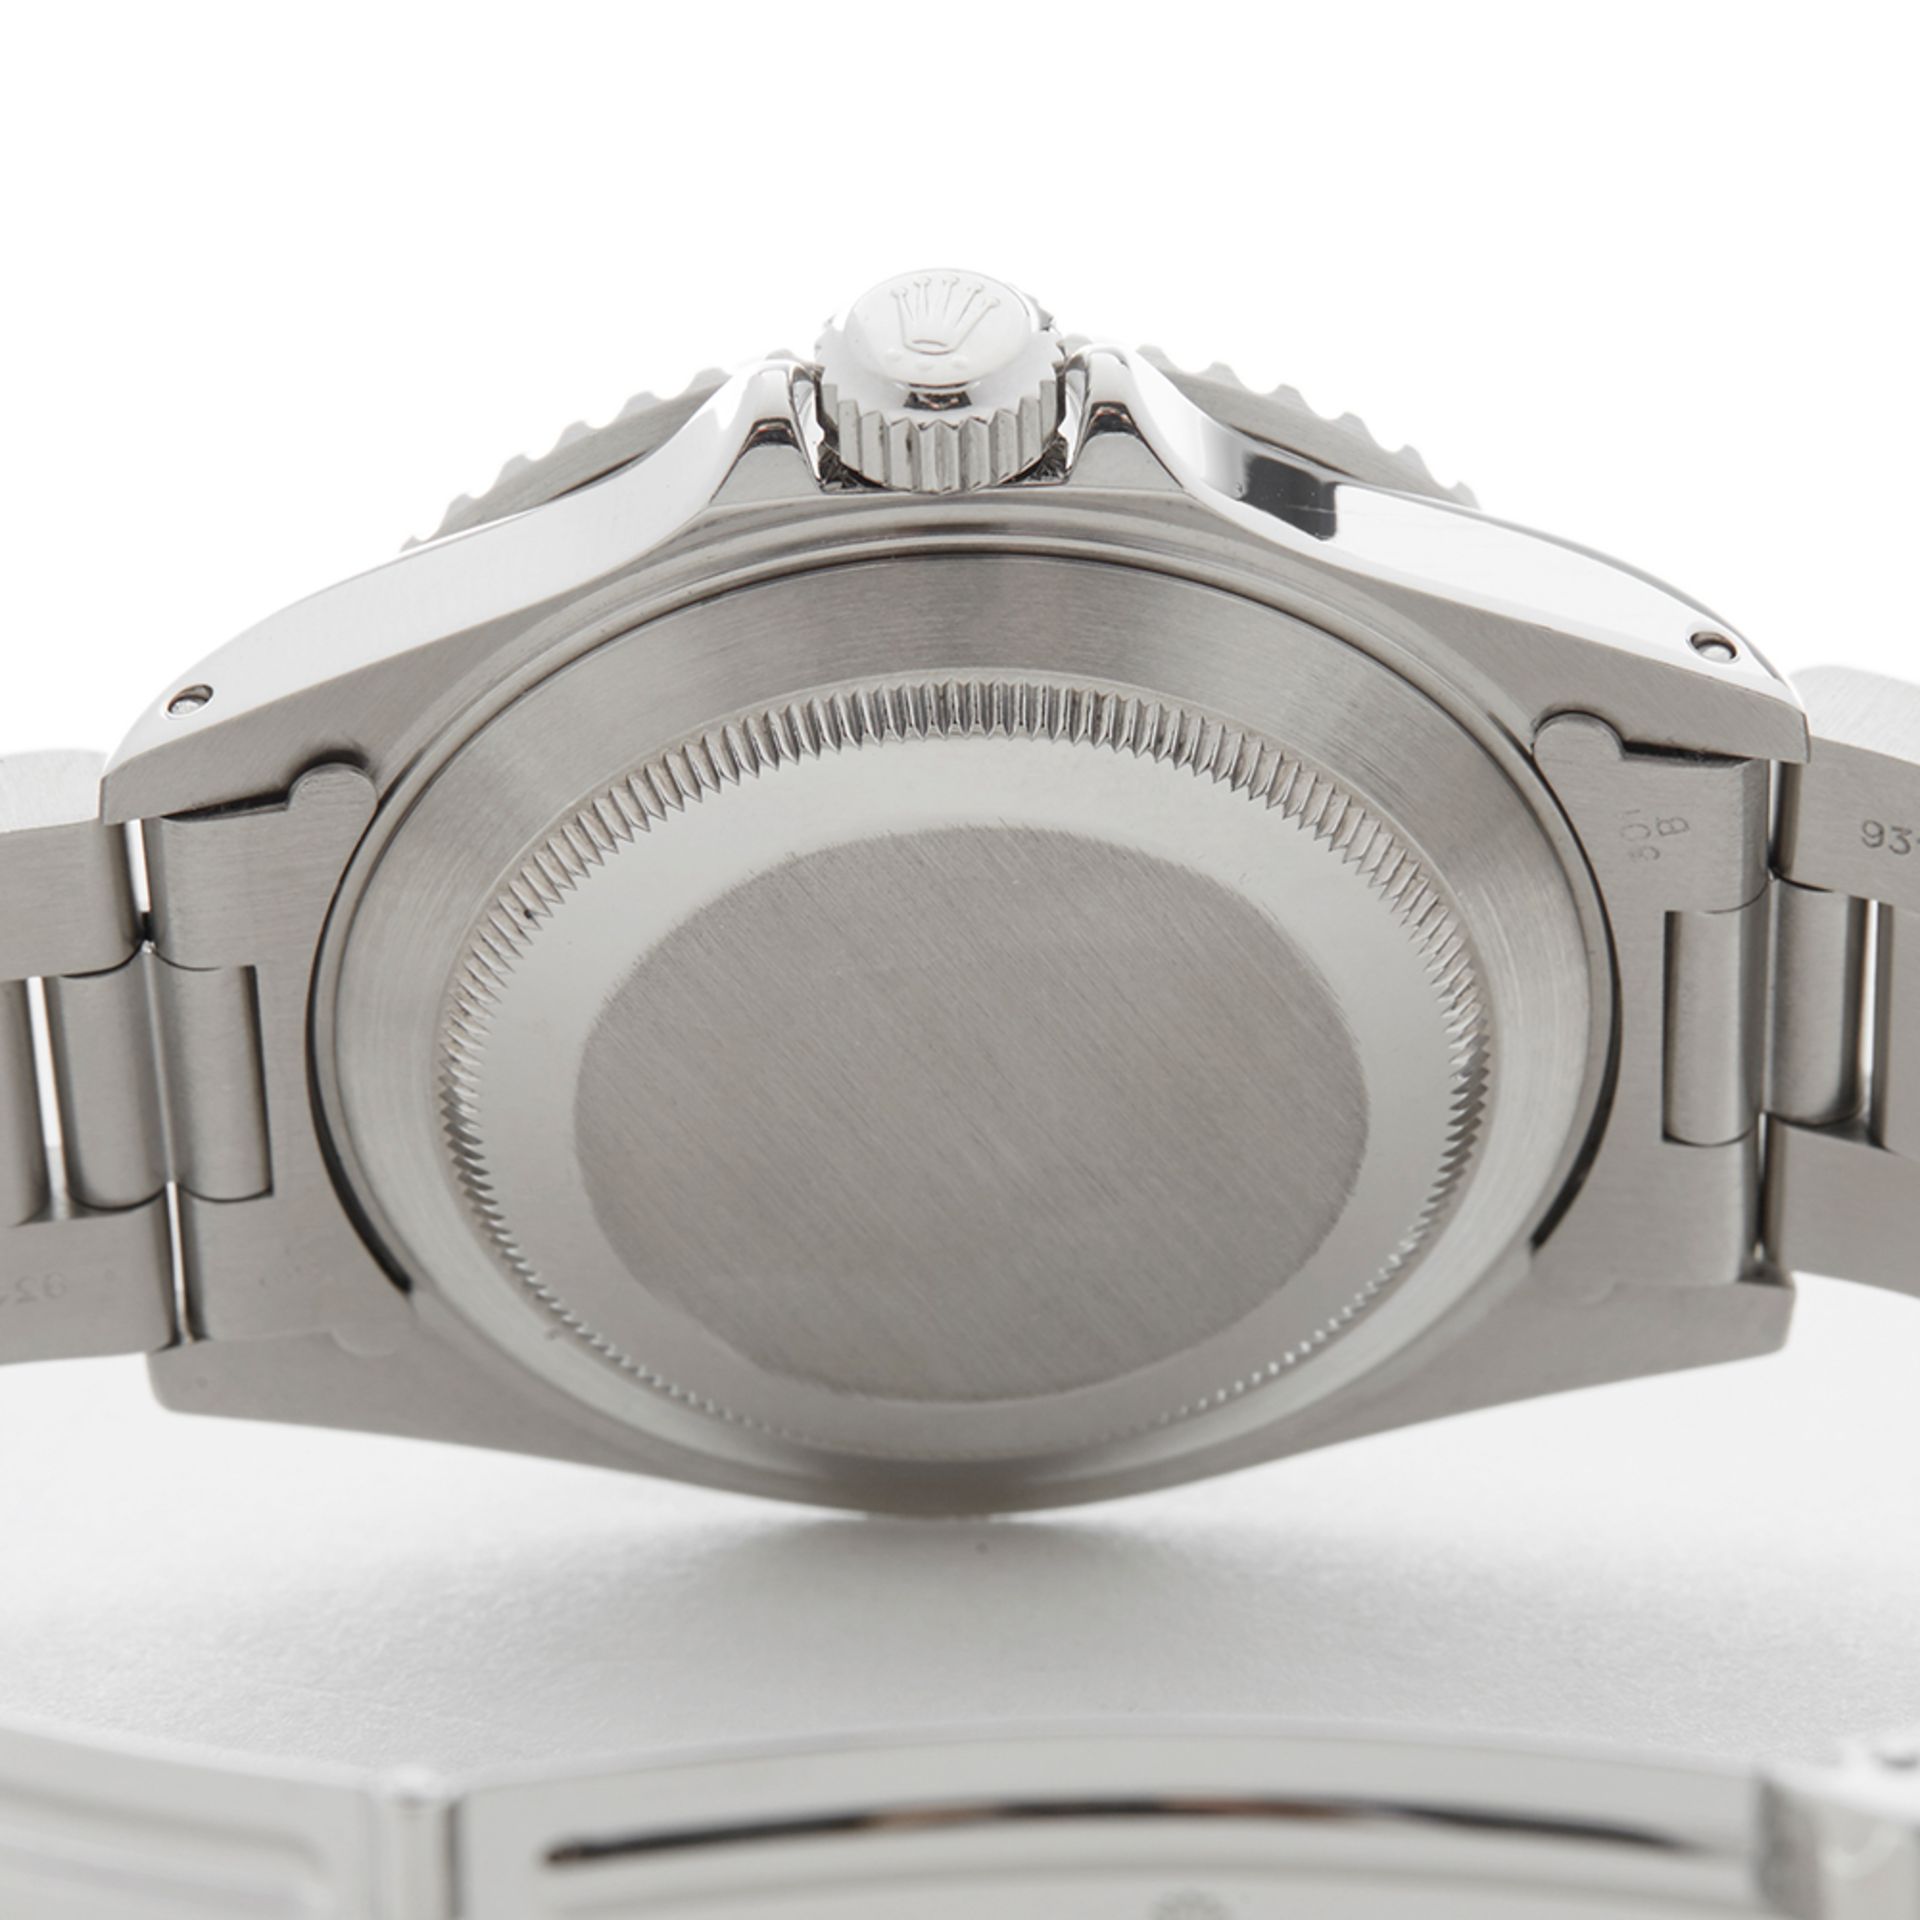 Submariner 40mm Stainless Steel 16610 - Image 8 of 9